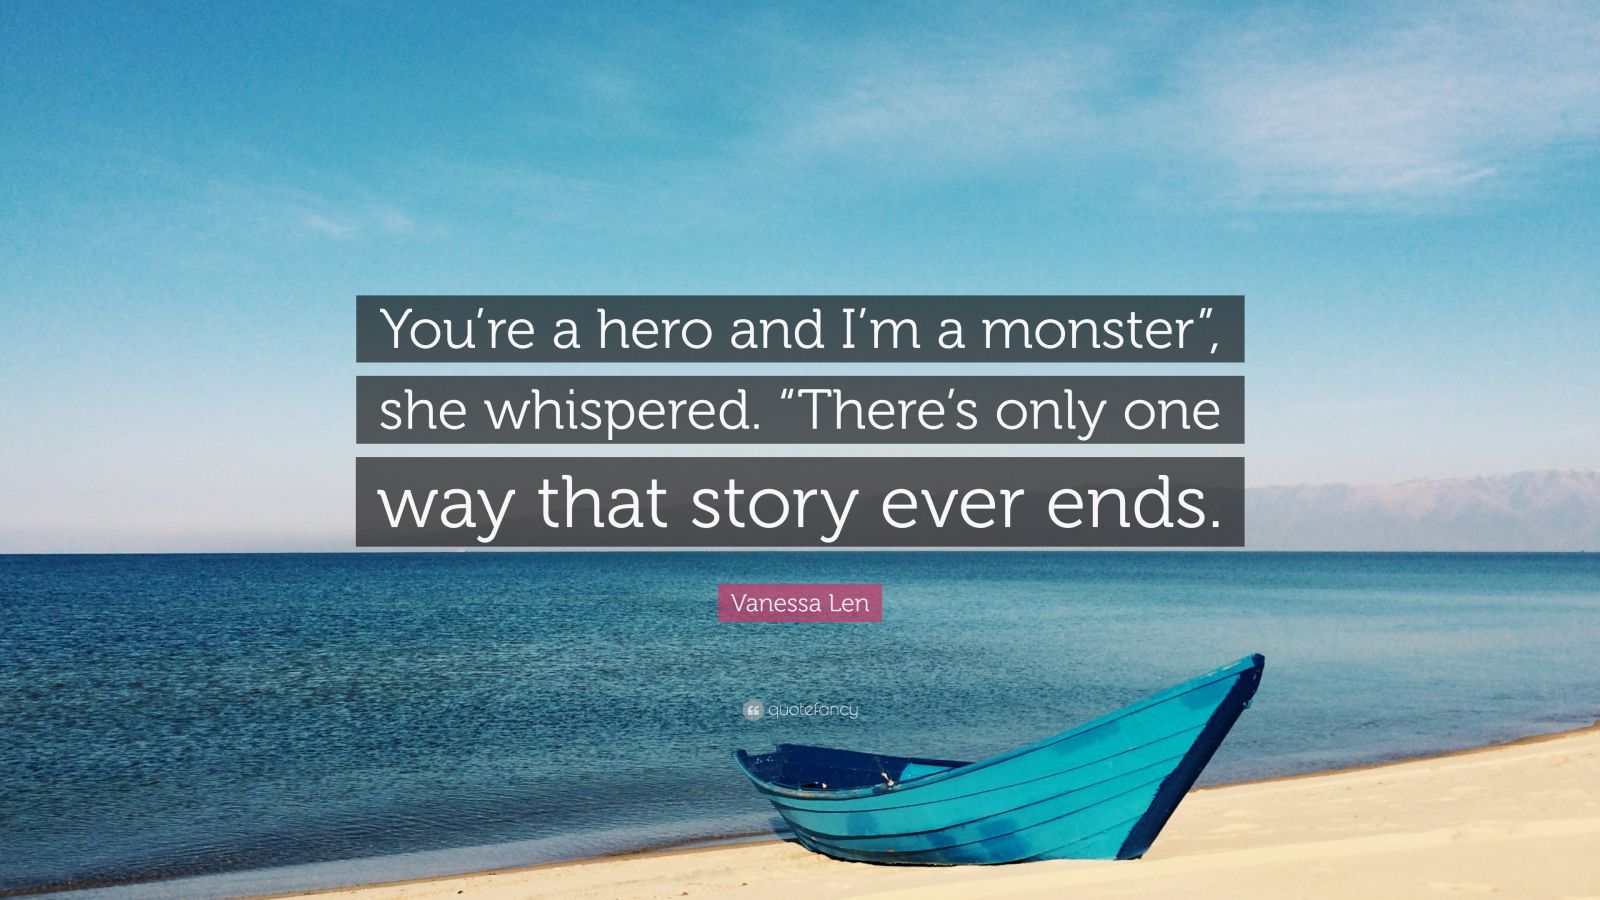 Vanessa Len Quote: “You’re a hero and I’m a monster”, she whispered ...